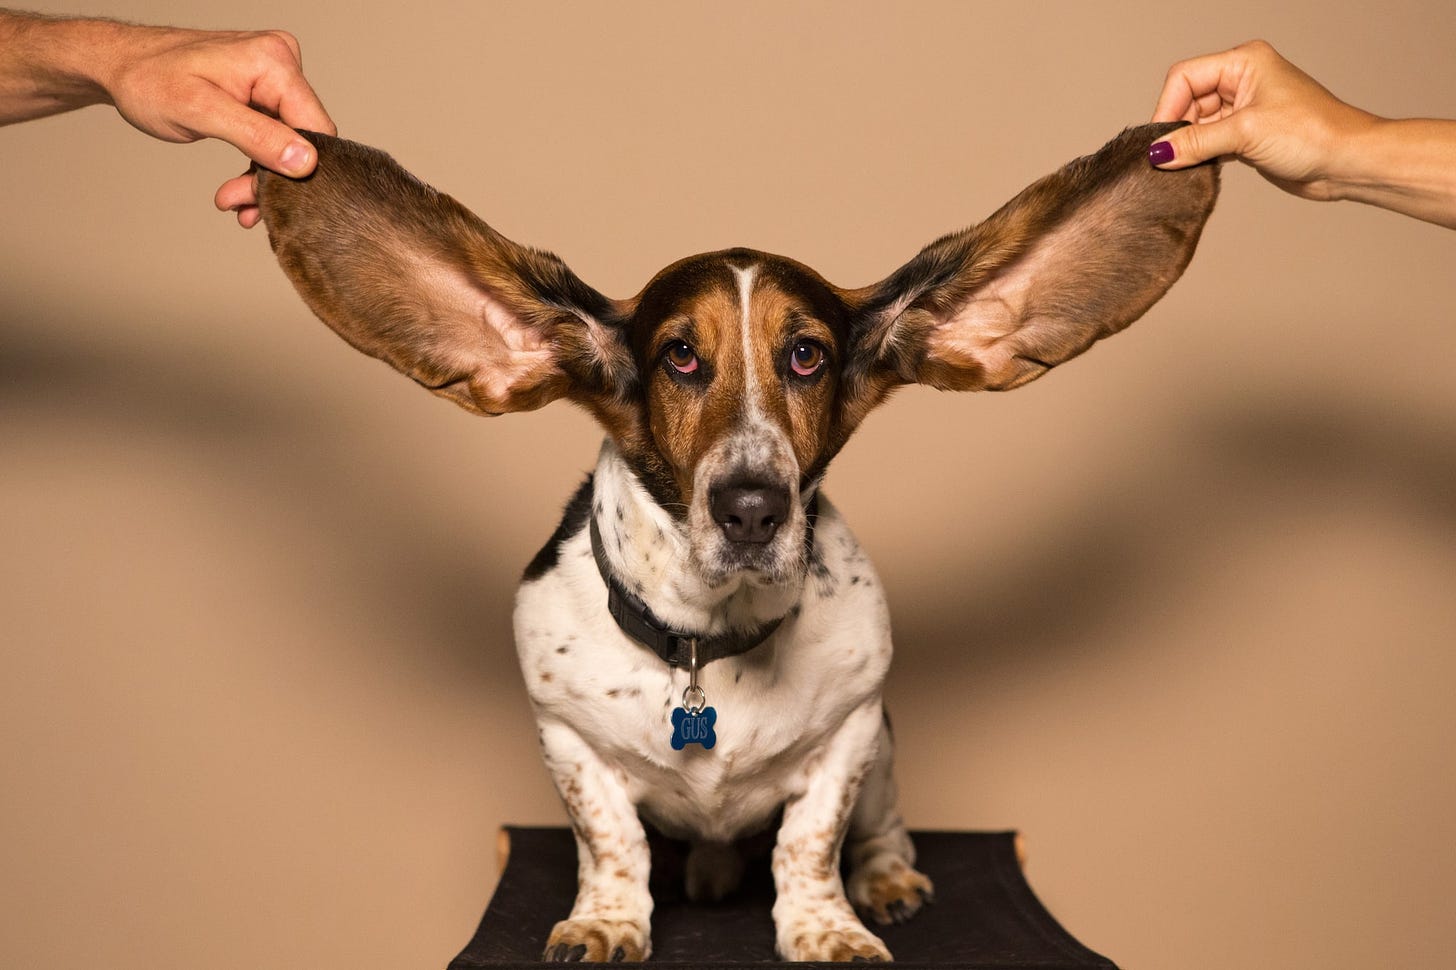 The problem of the over-sized ears